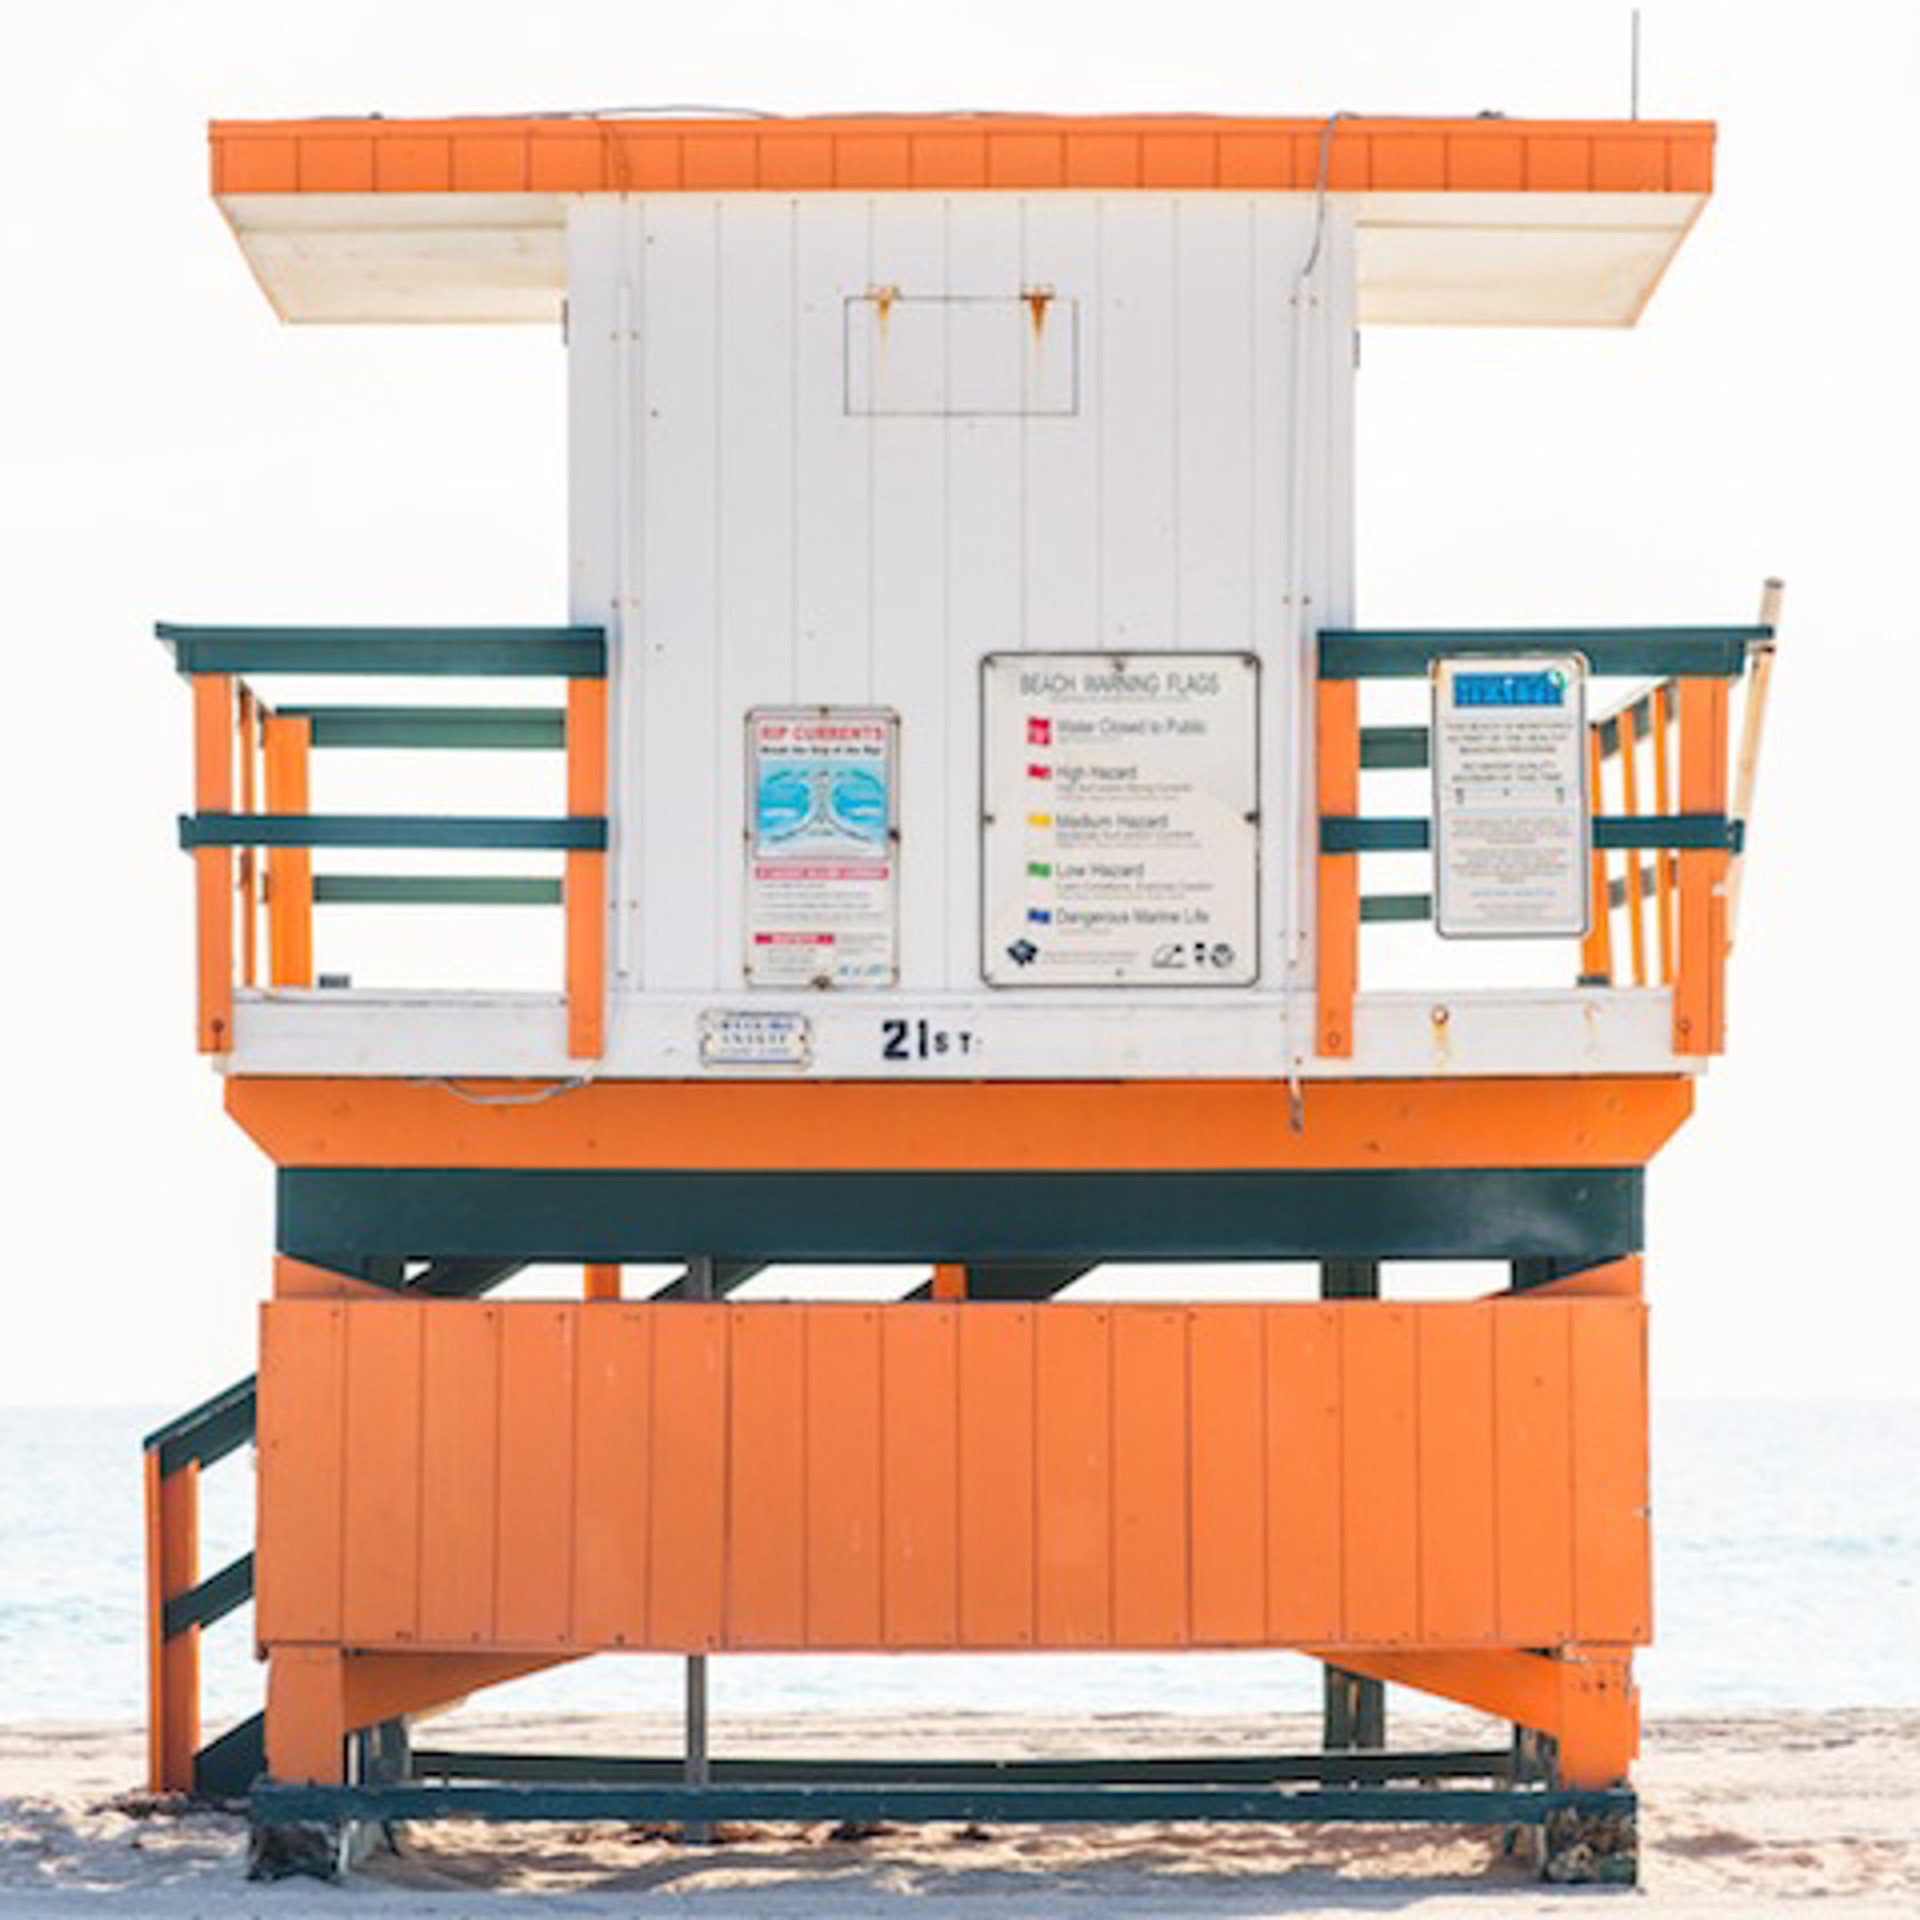 21st Street Lifeguard Stand, Rear View by Peter Mendelson